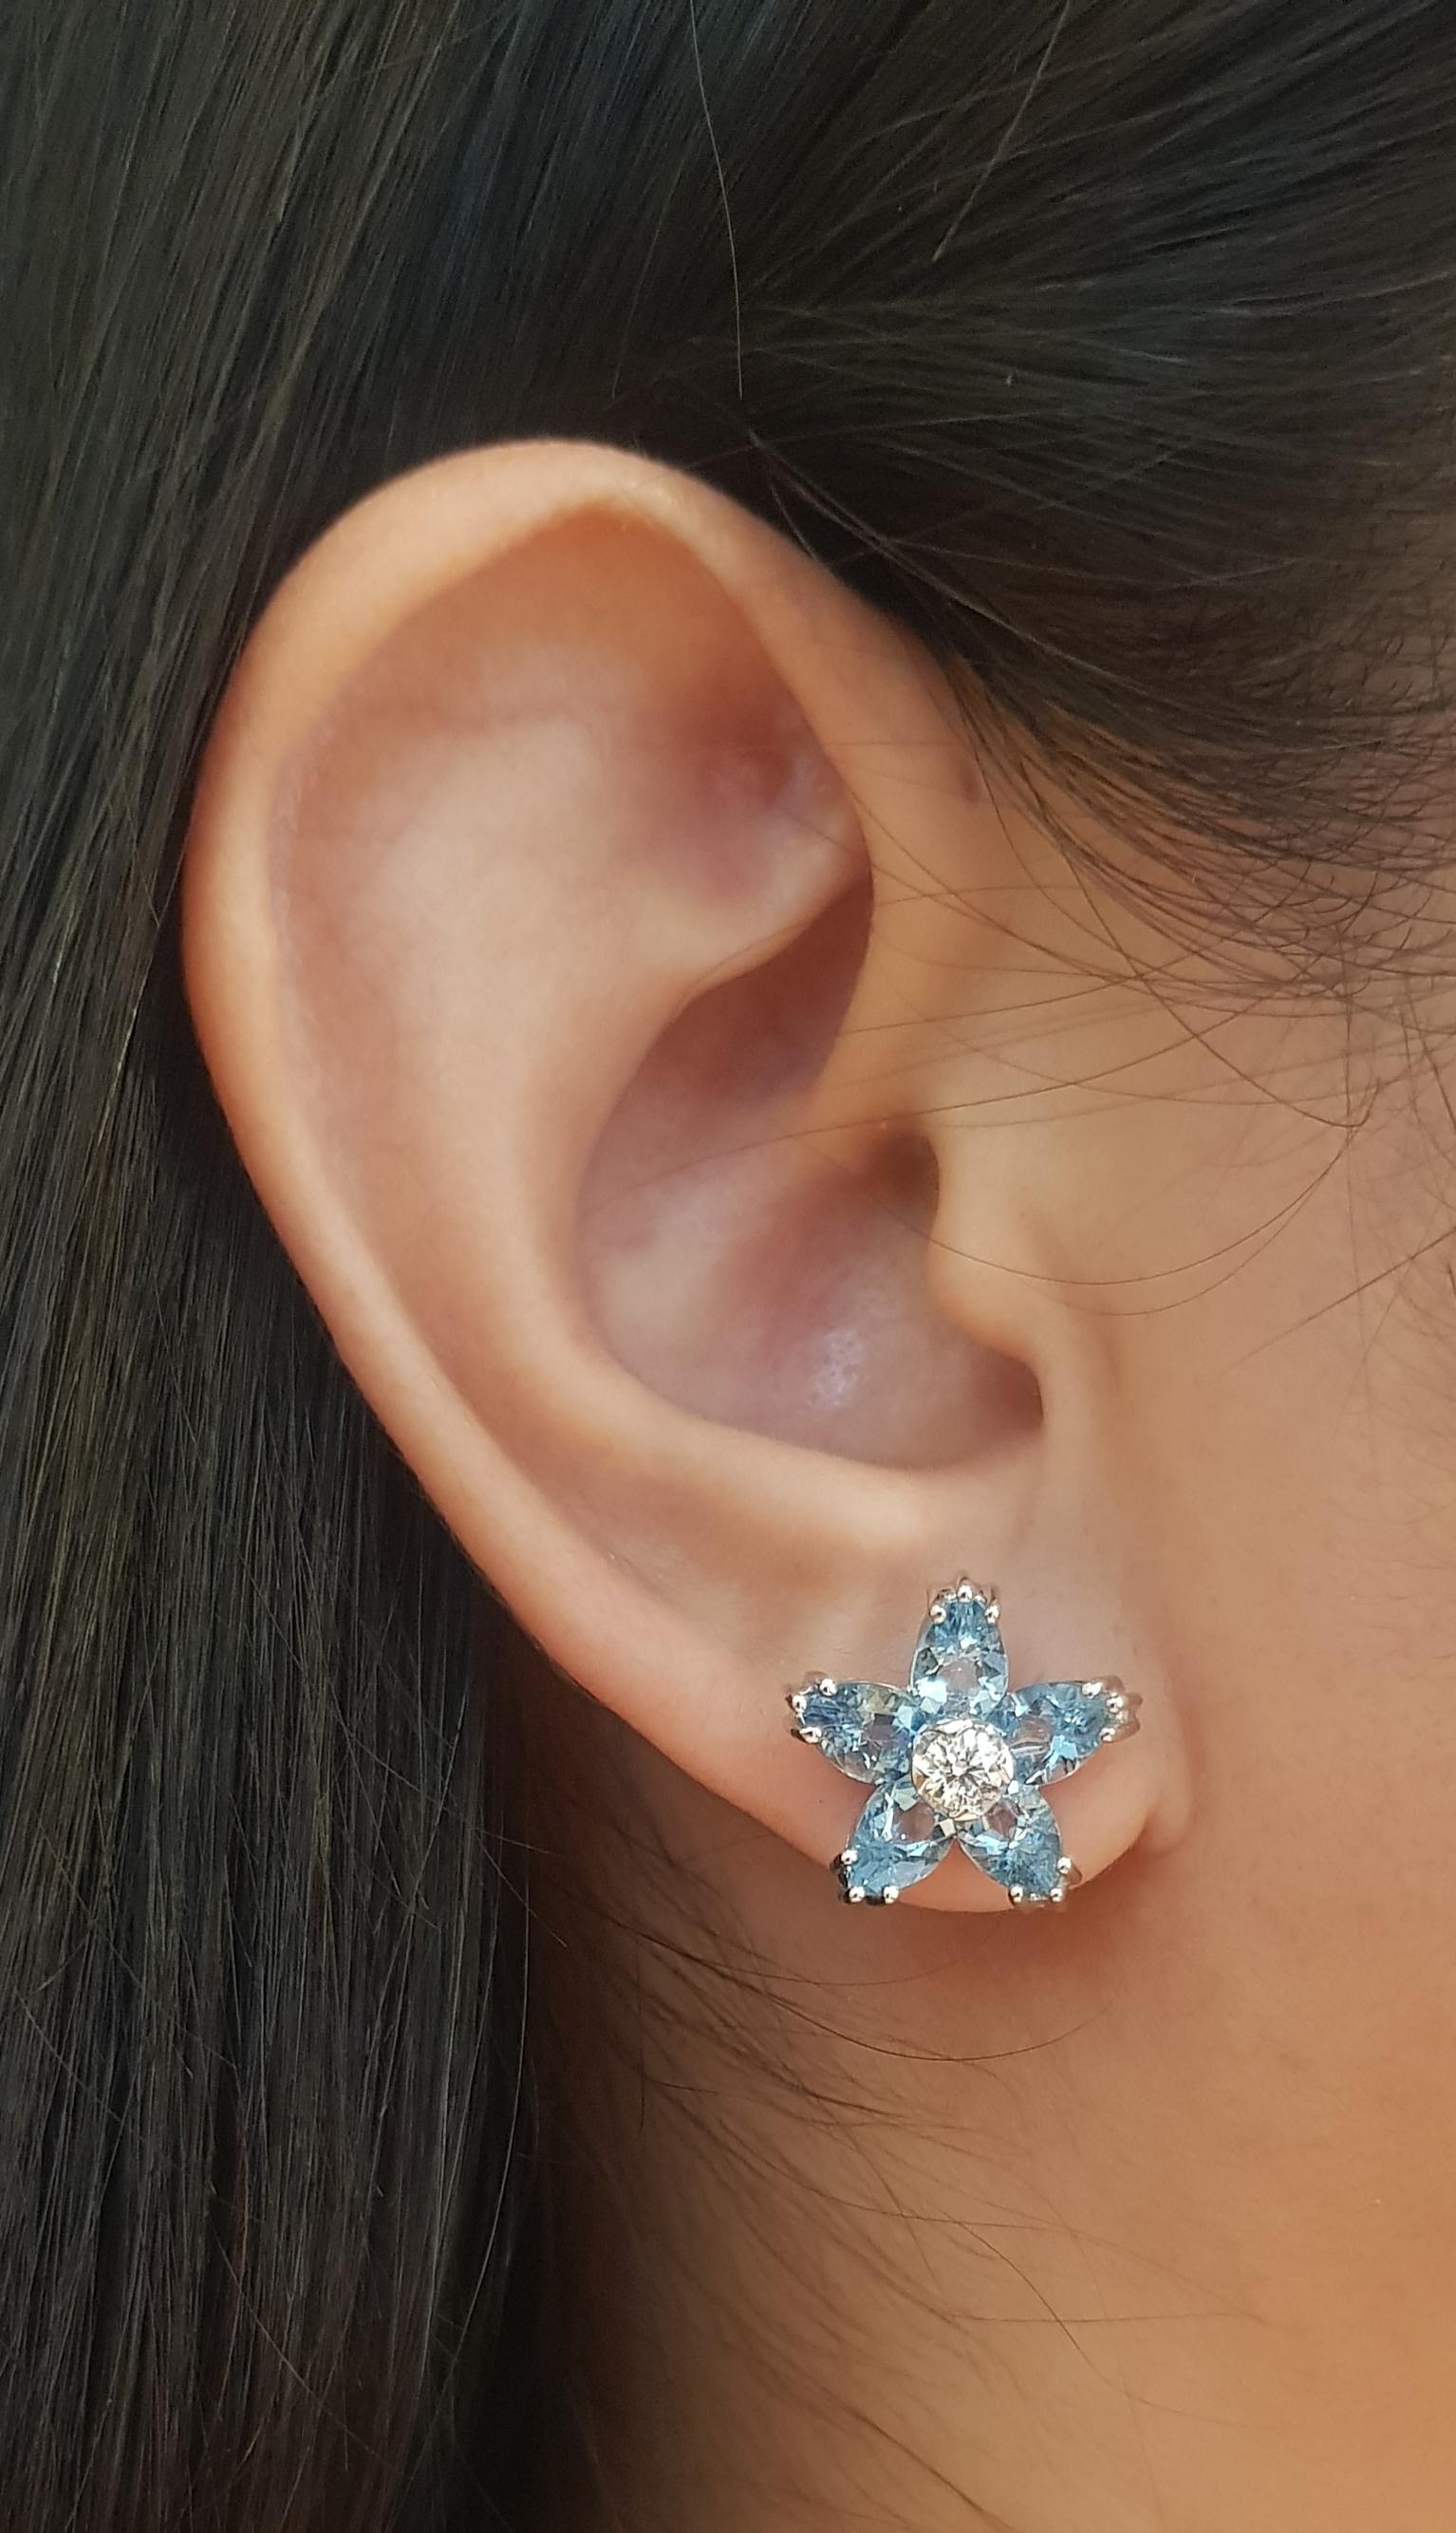 Aquamarine 3.57 carats with Diamond 0.30 carat Earrings set in 18K White Gold Settings

Width: 1.5 cm 
Length: 1.5 cm
Total Weight: 5.39 grams

